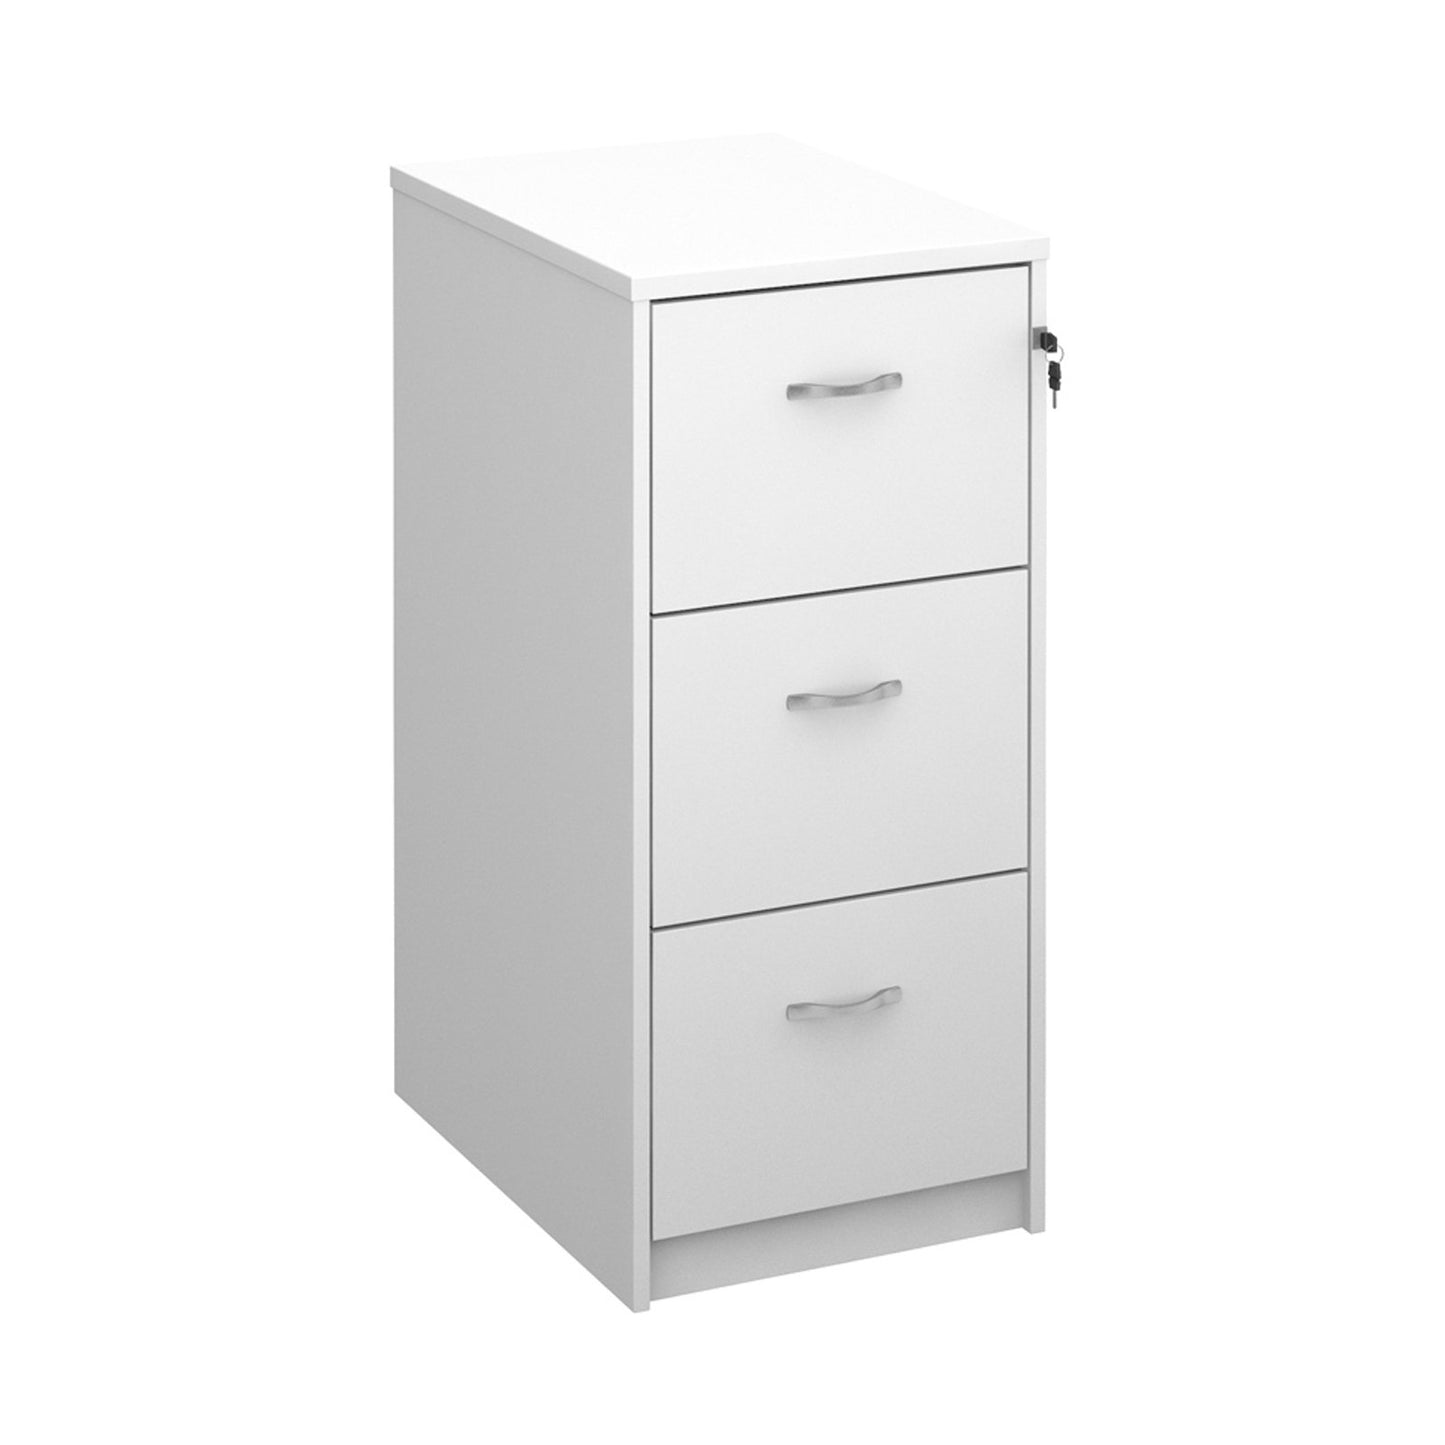 Wooden Filing Cabinet With Silver Handles - 4 Drawer - Grey Oak